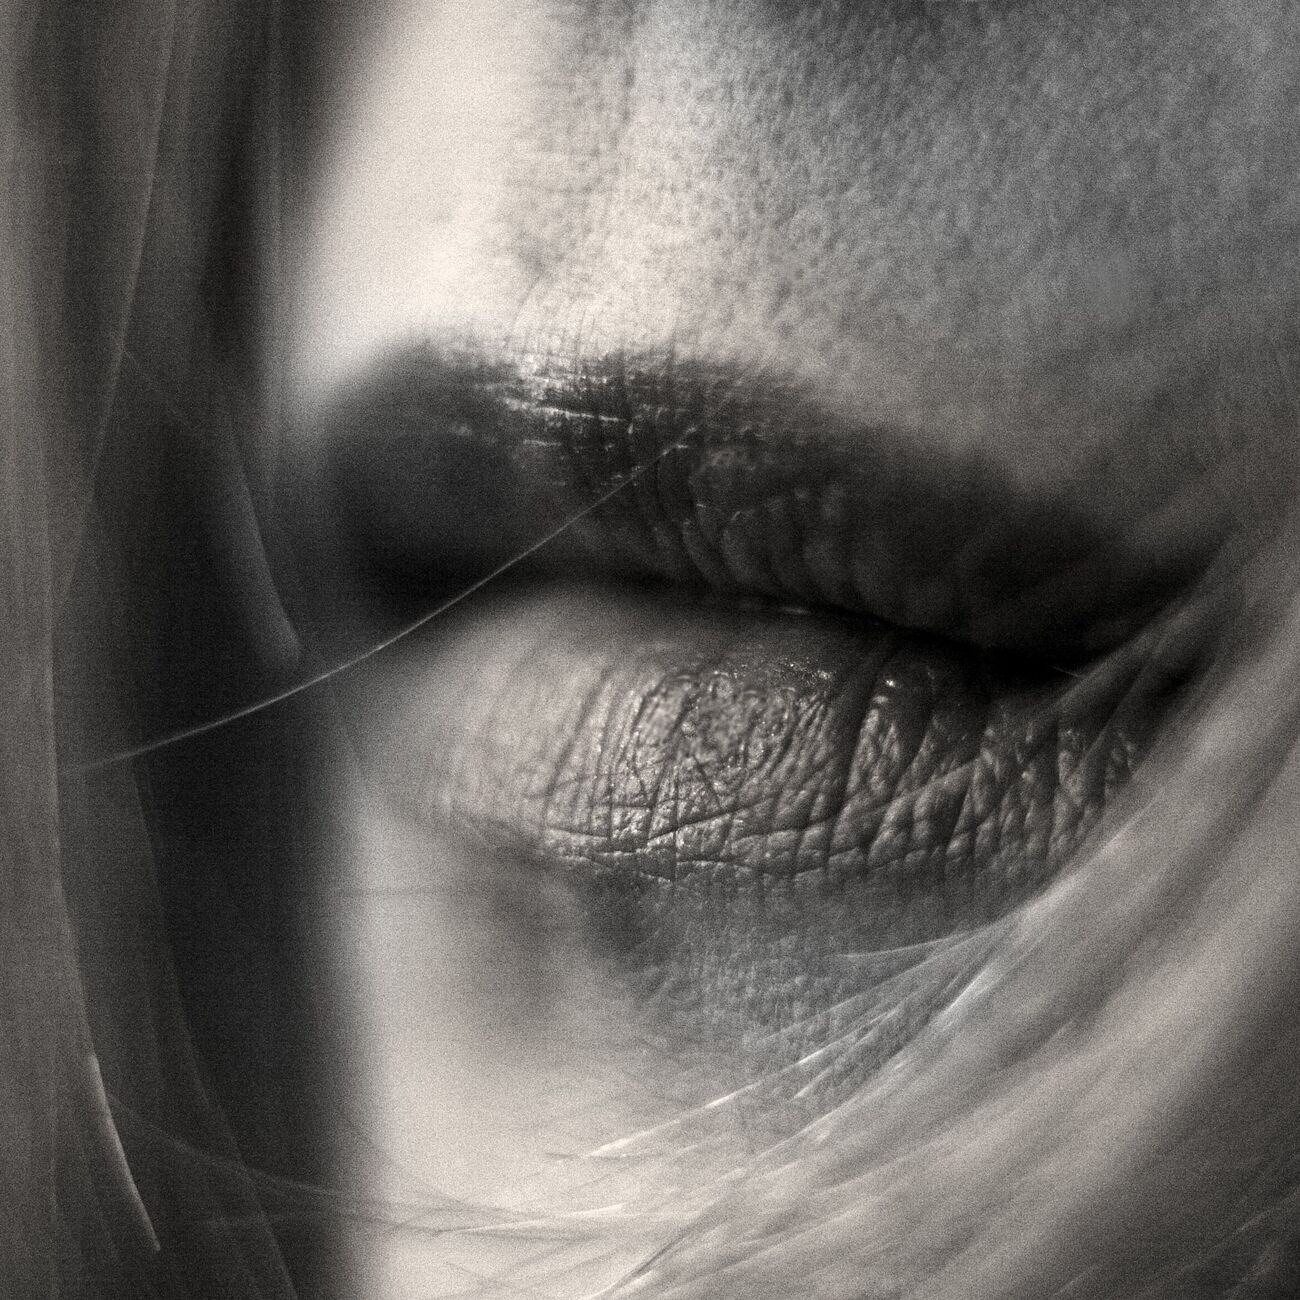 Purchase a 15.7 x 15.7 in, Sweet on her lips. Ref-580-12 - Denis Olivier Art Photography